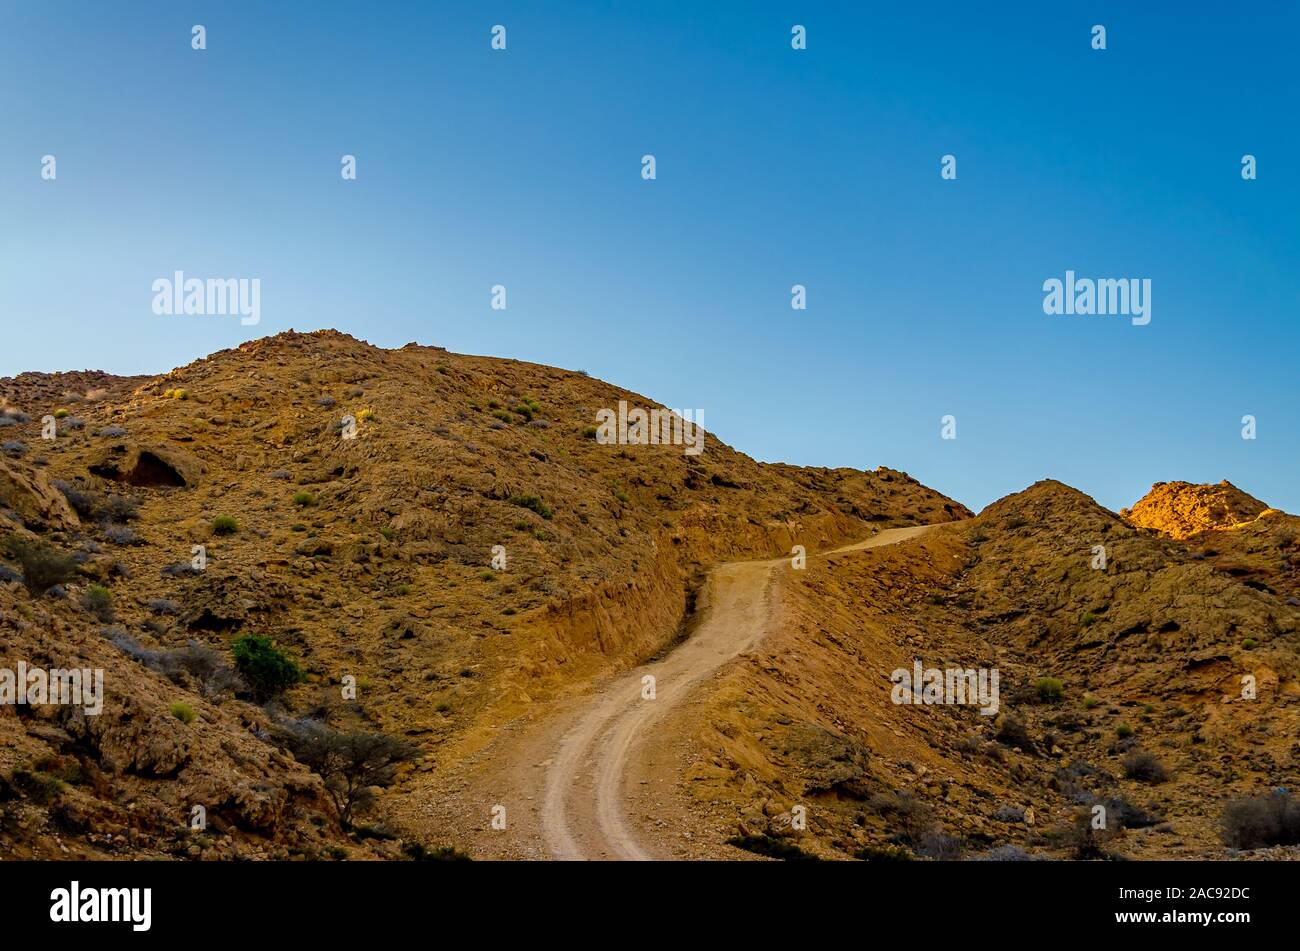 Winding dirt road through the orange colored barren mountains with a clear blue sky as background. From Muscat, Oman. Stock Photo